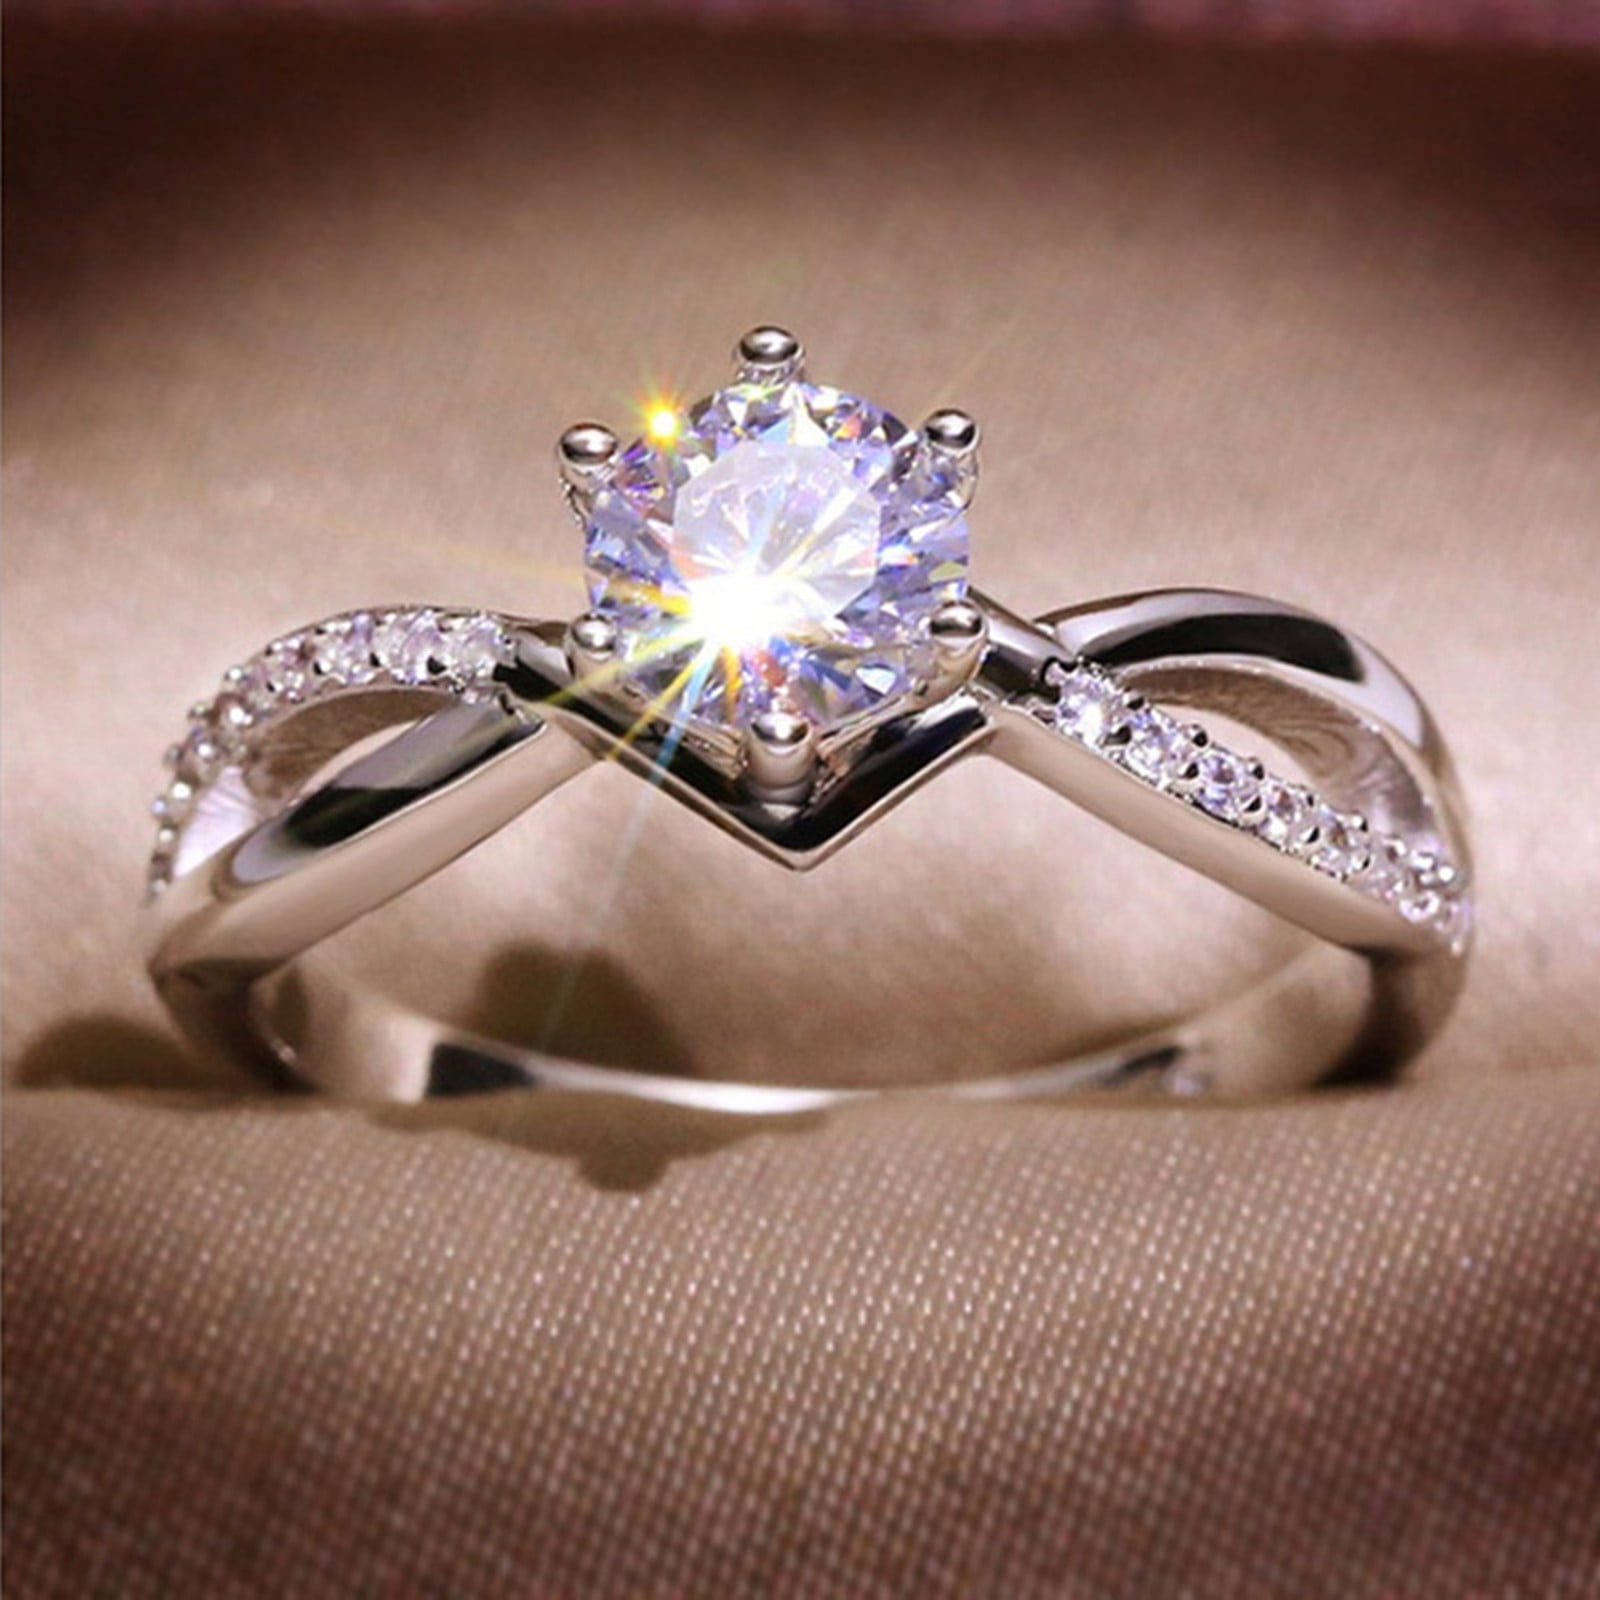 Second Marriage Engagement Ring. We have set out to reduce some of the… |  by Albert Hern | Medium